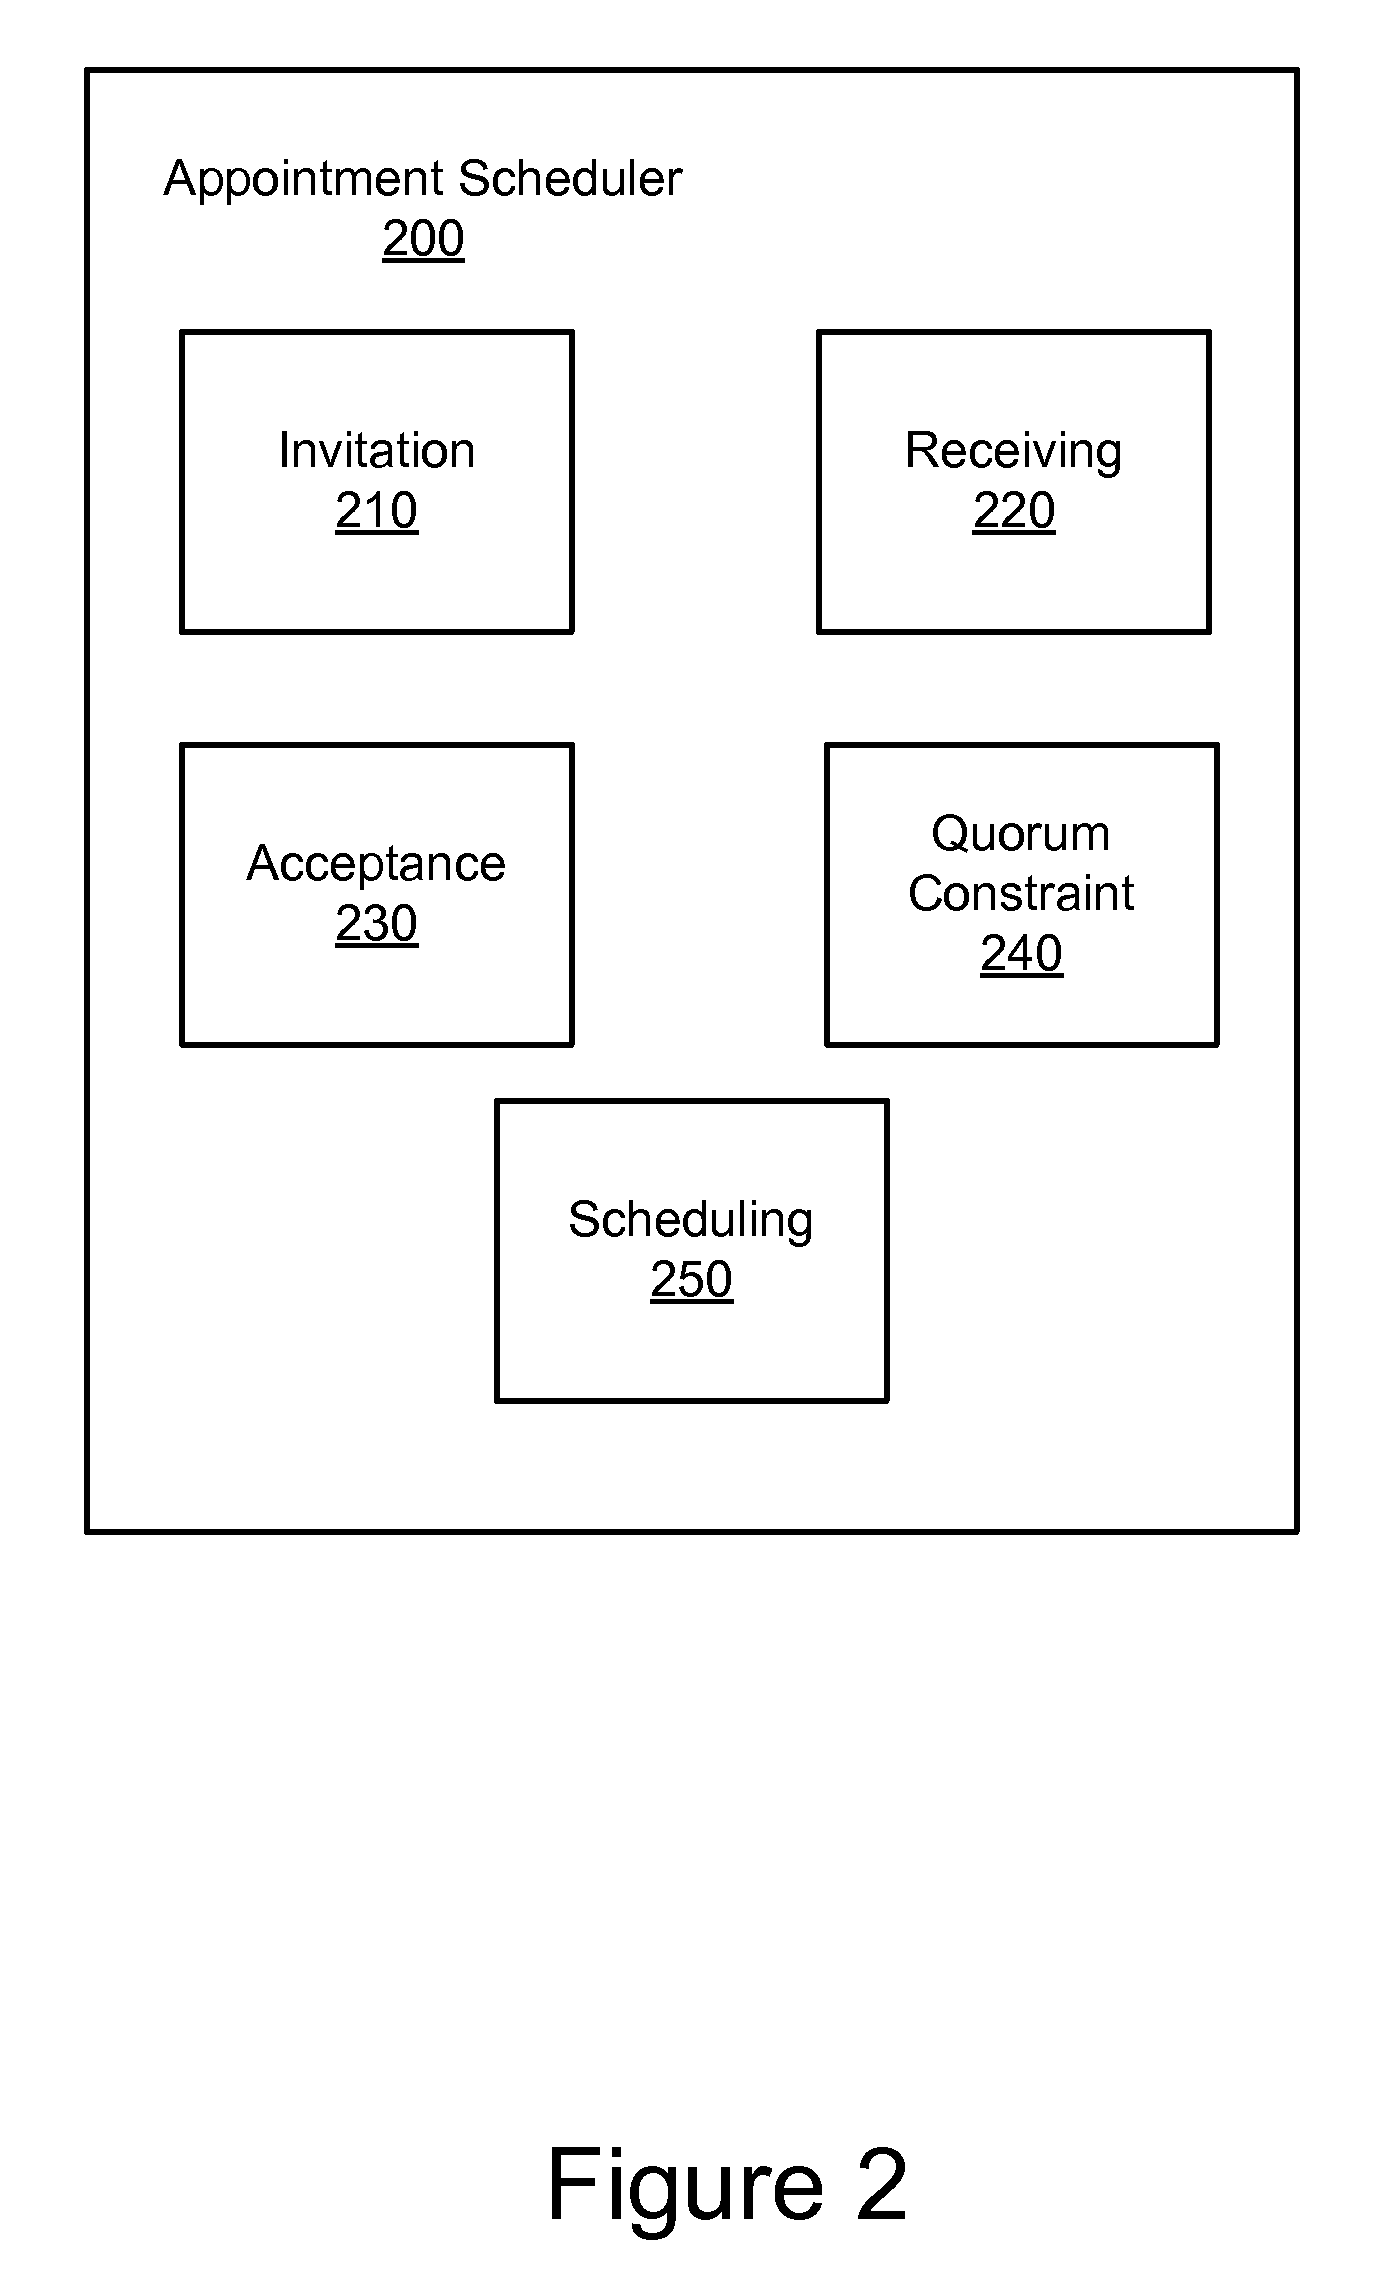 Quorum management of appointment scheduling